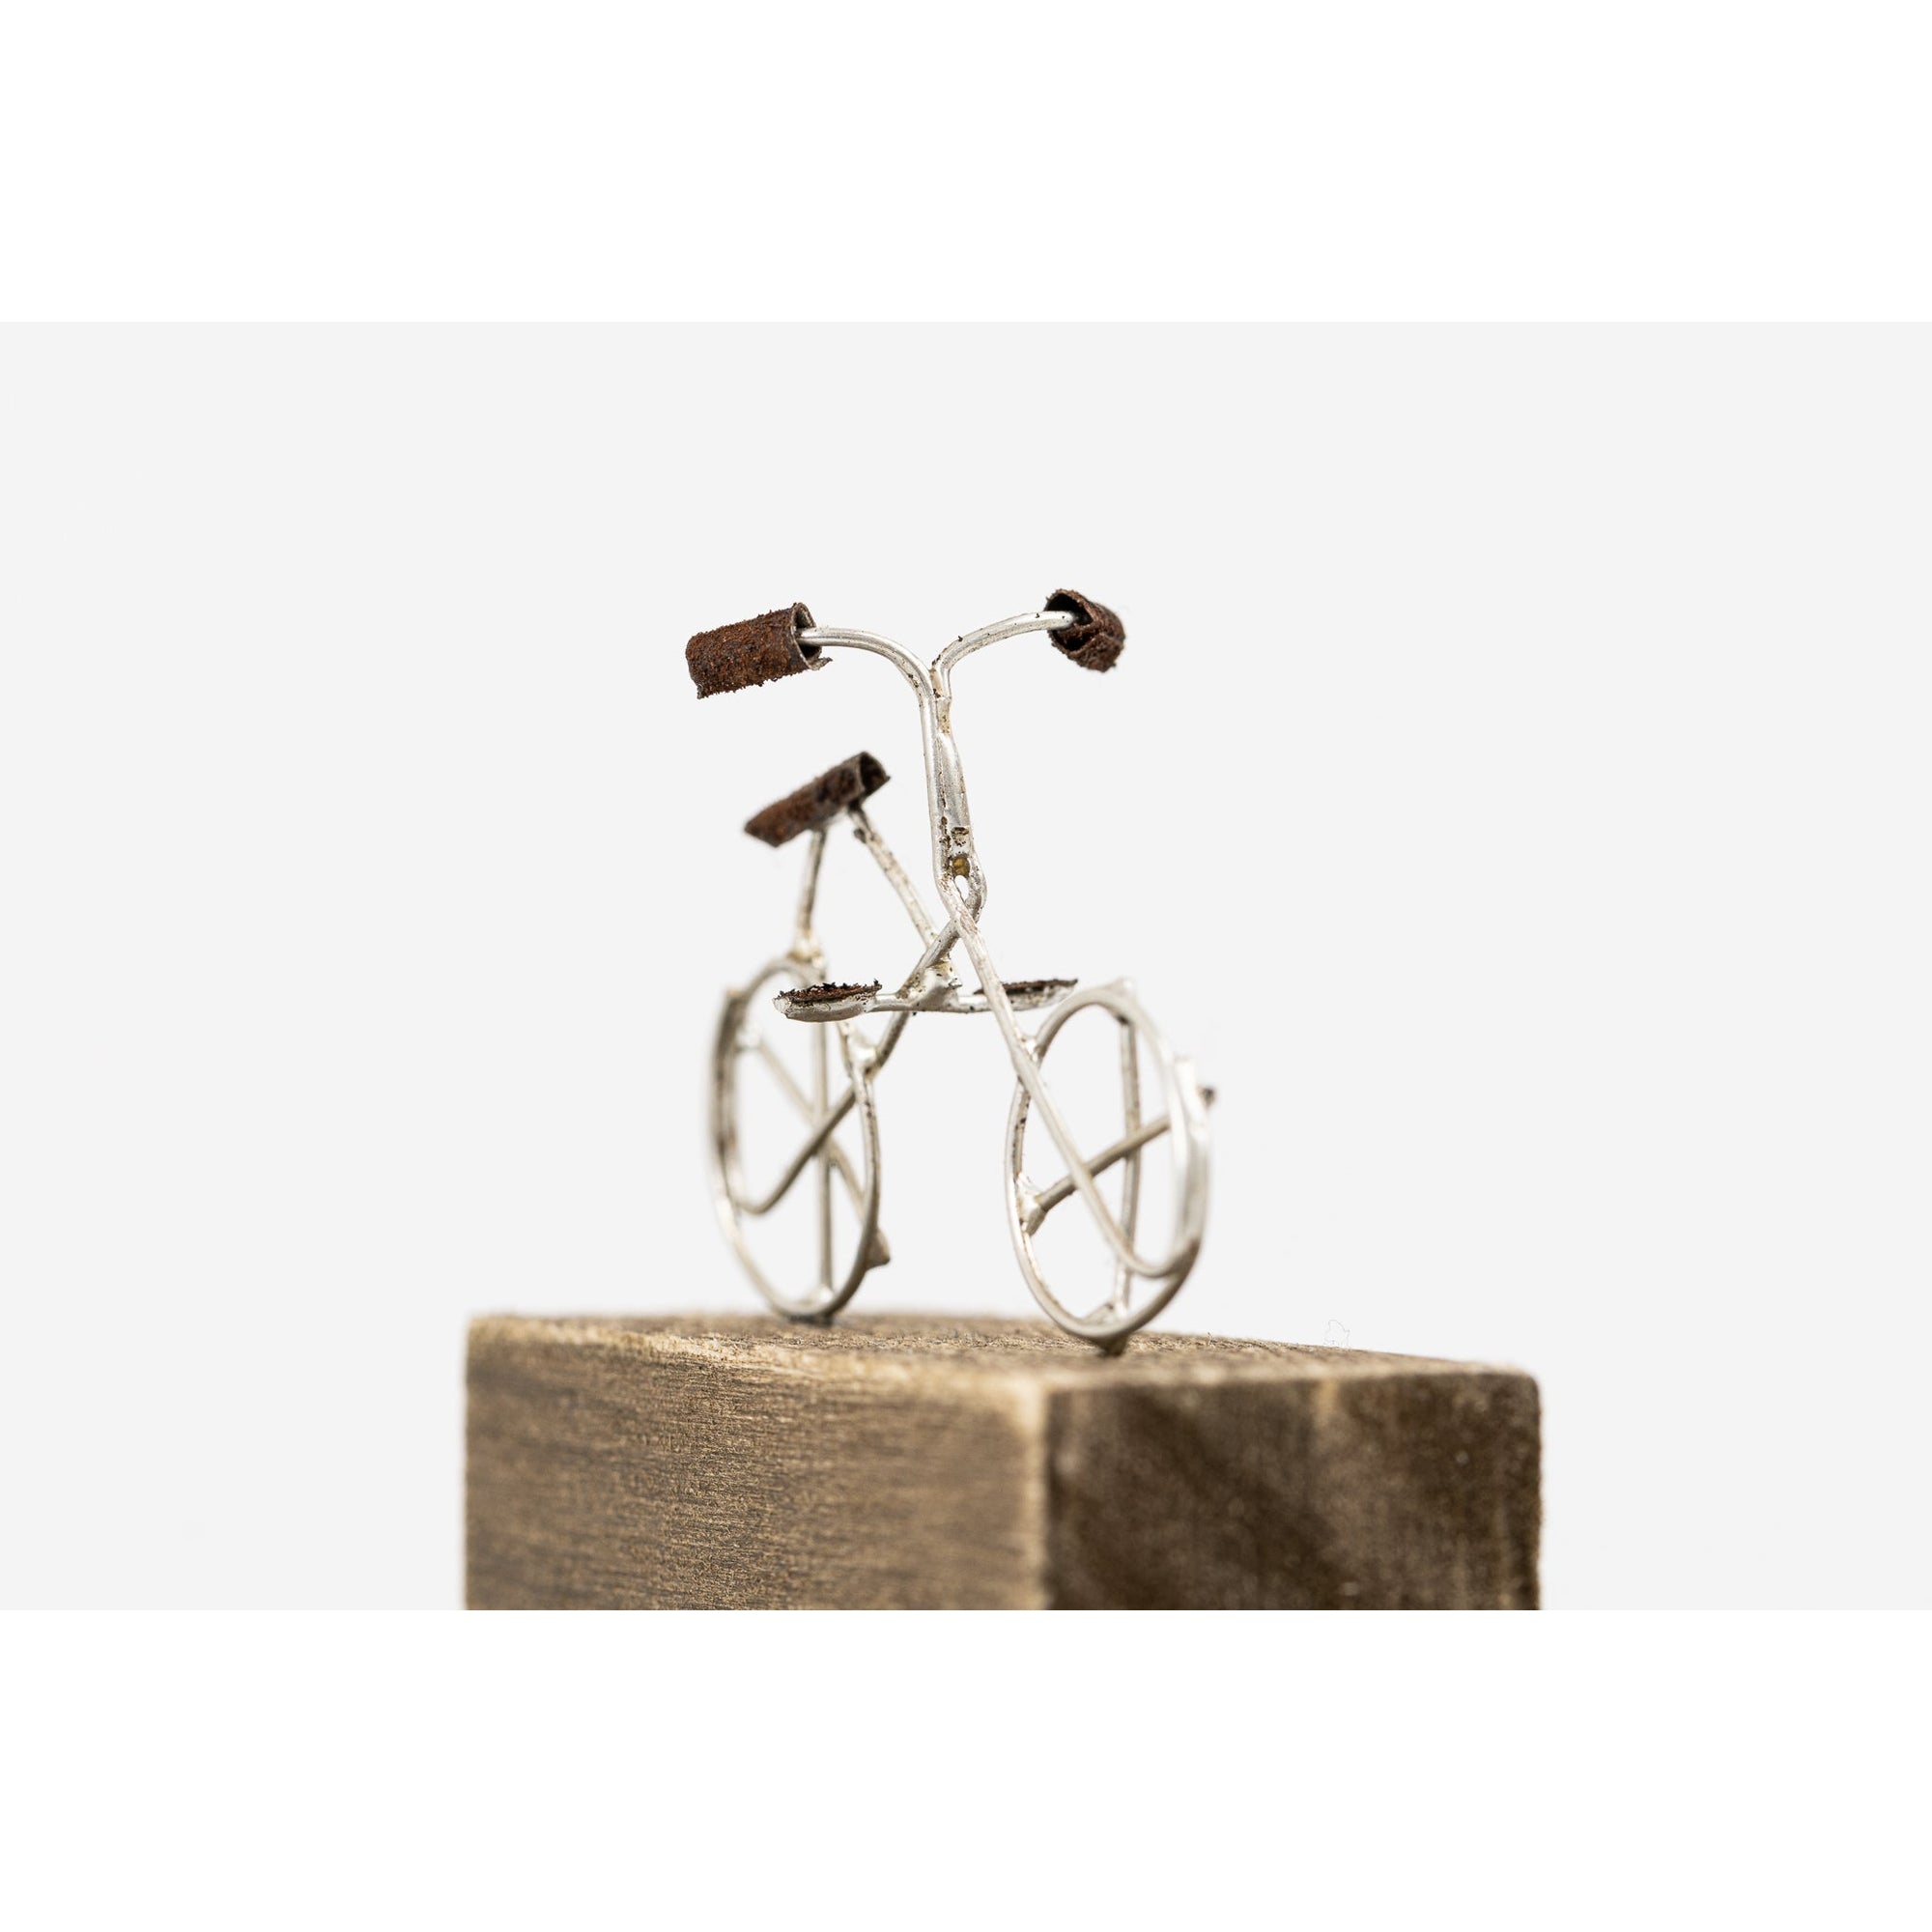 Bicycle by Sarah Jane Brown available at Padstow Gallery, Cornwall